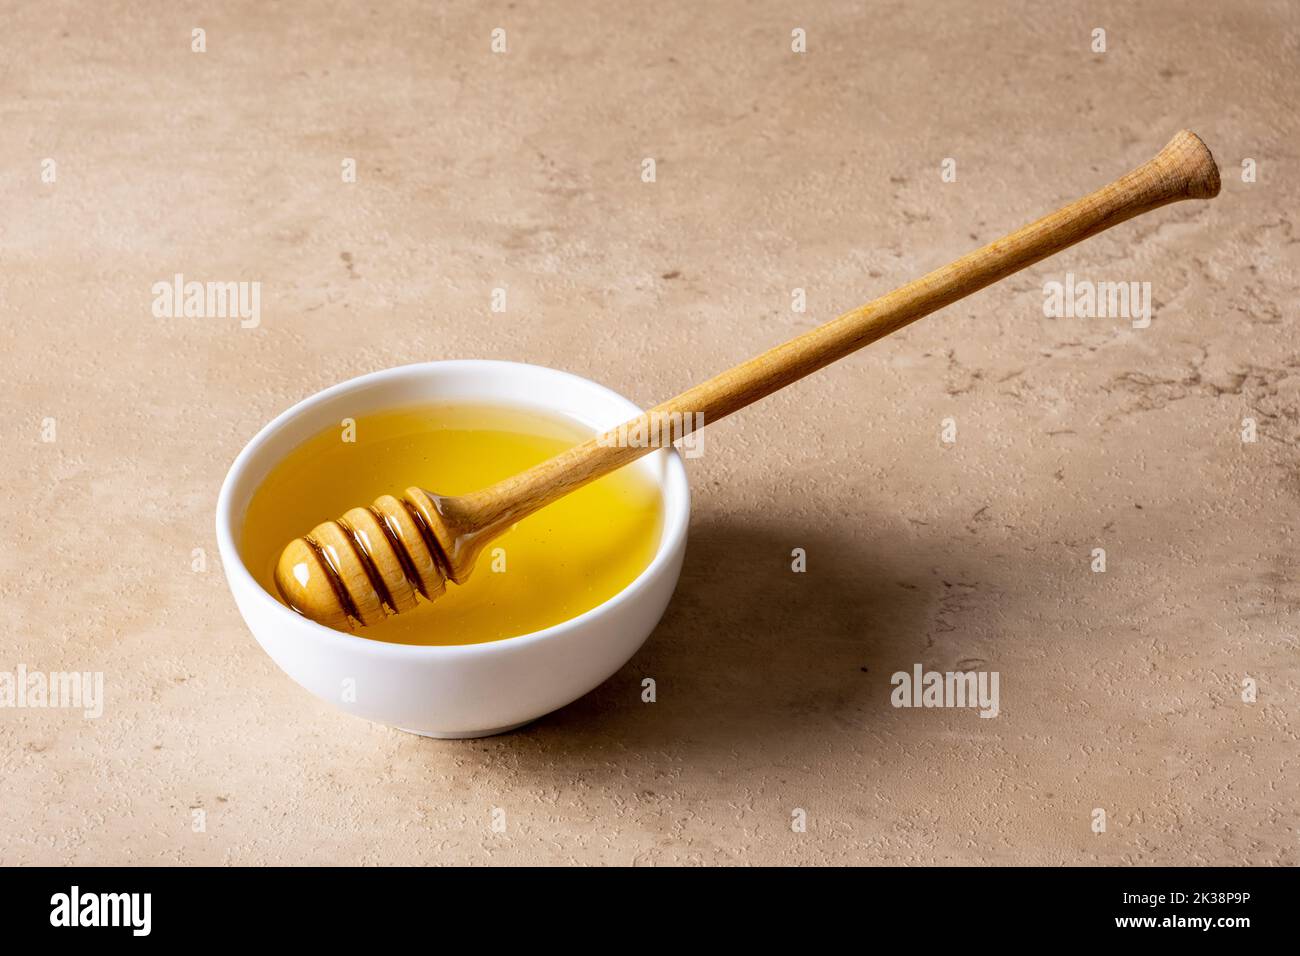 A bowl of honey and a wooden spoon for honey on a light surface. Selective focus. Stock Photo